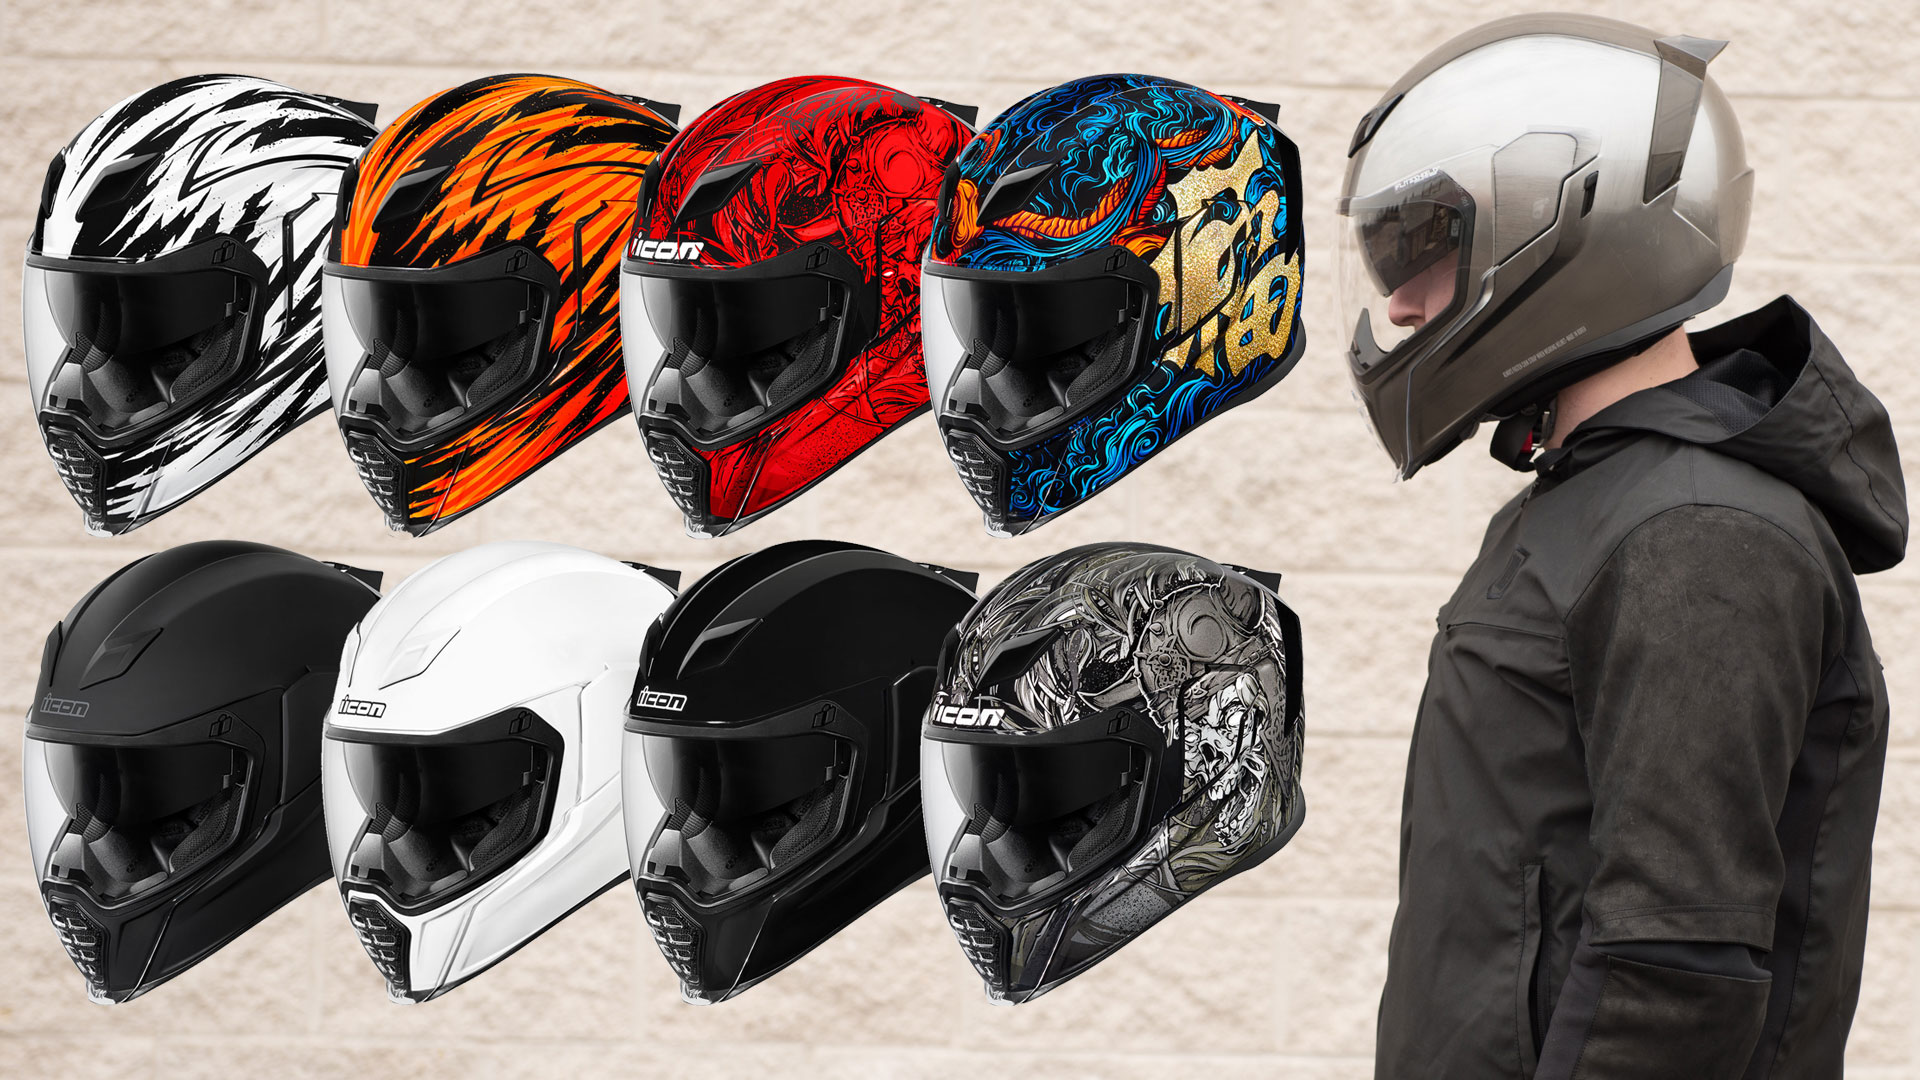 New 2018 Icon Helmet Designs - Get Lowered Cycles